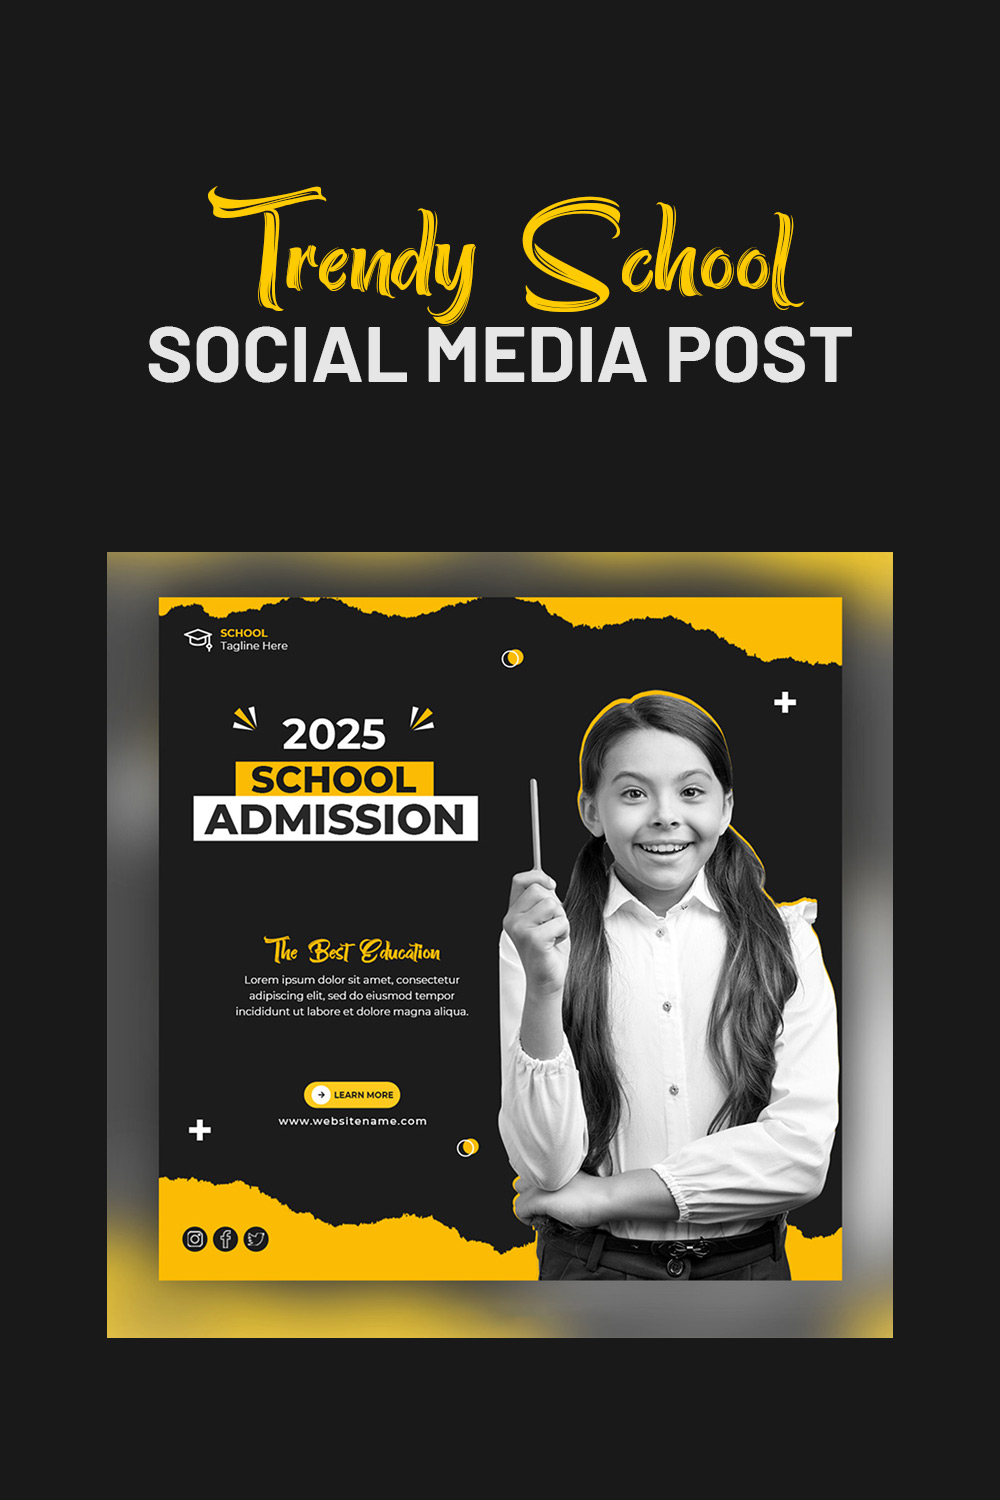 Trendy School education admission social media post and Square flyer template only-$4 pinterest preview image.